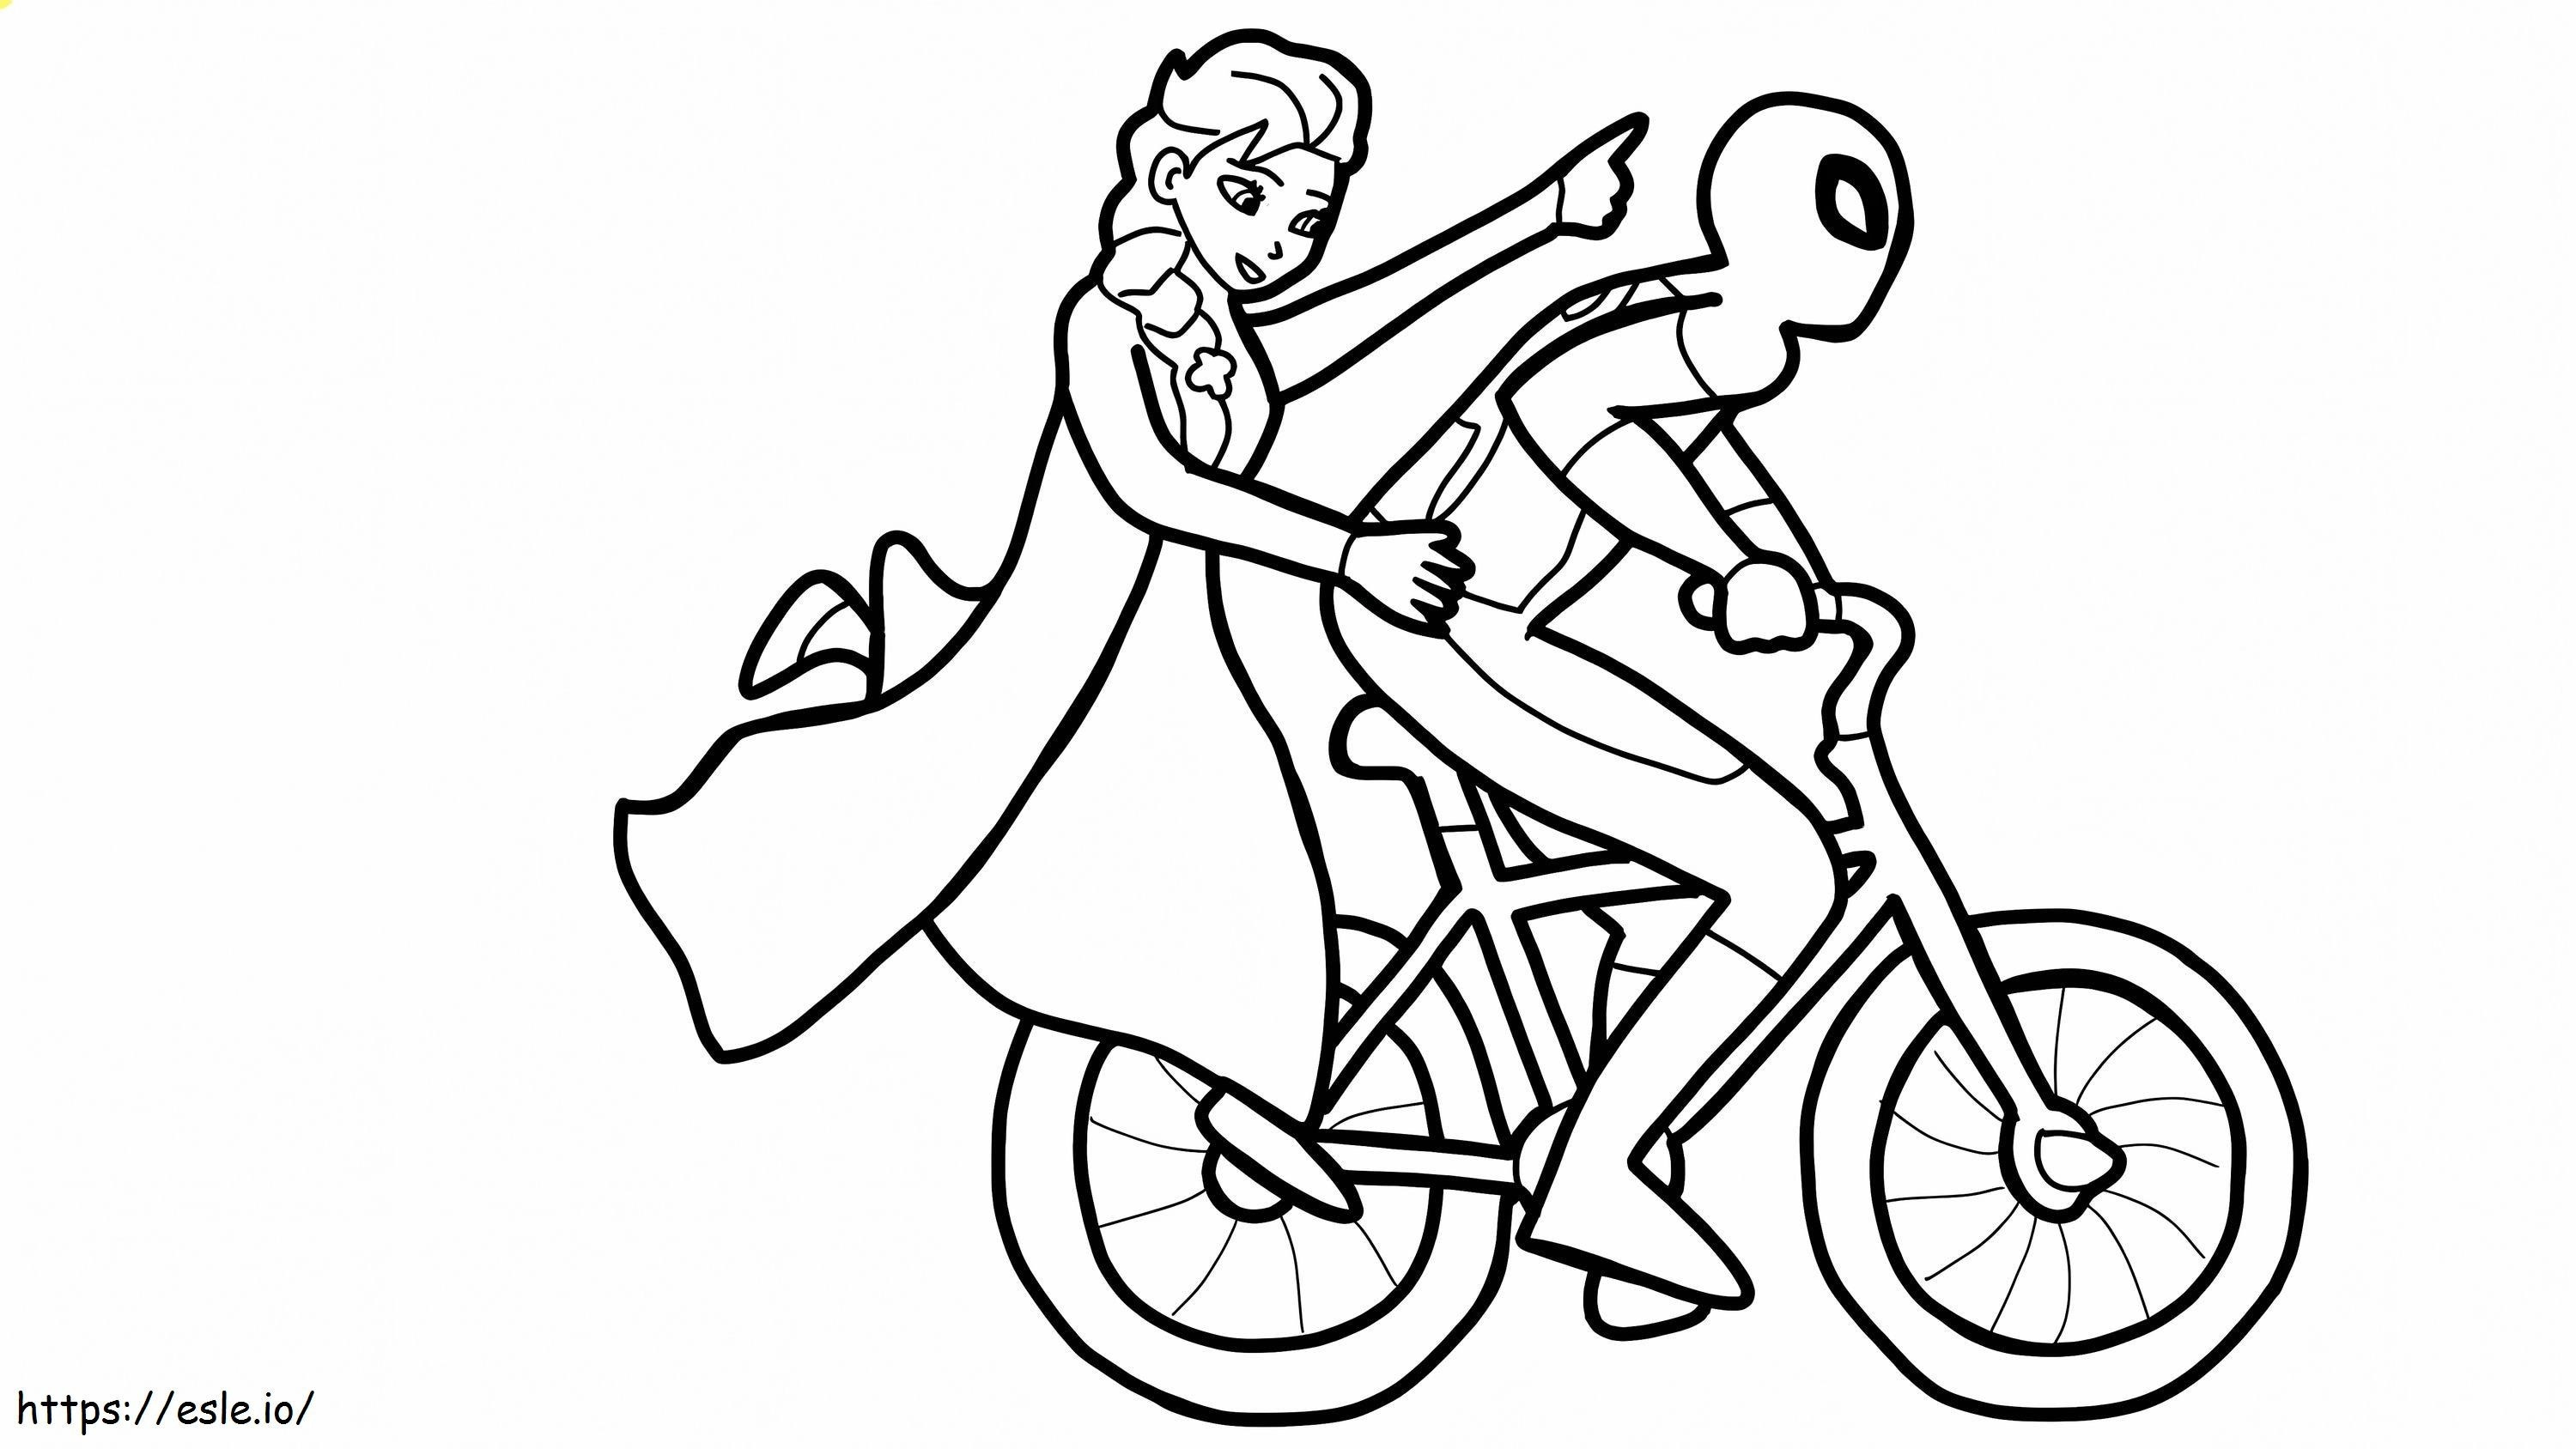 Elsa And Spider-Man On A Bike coloring page